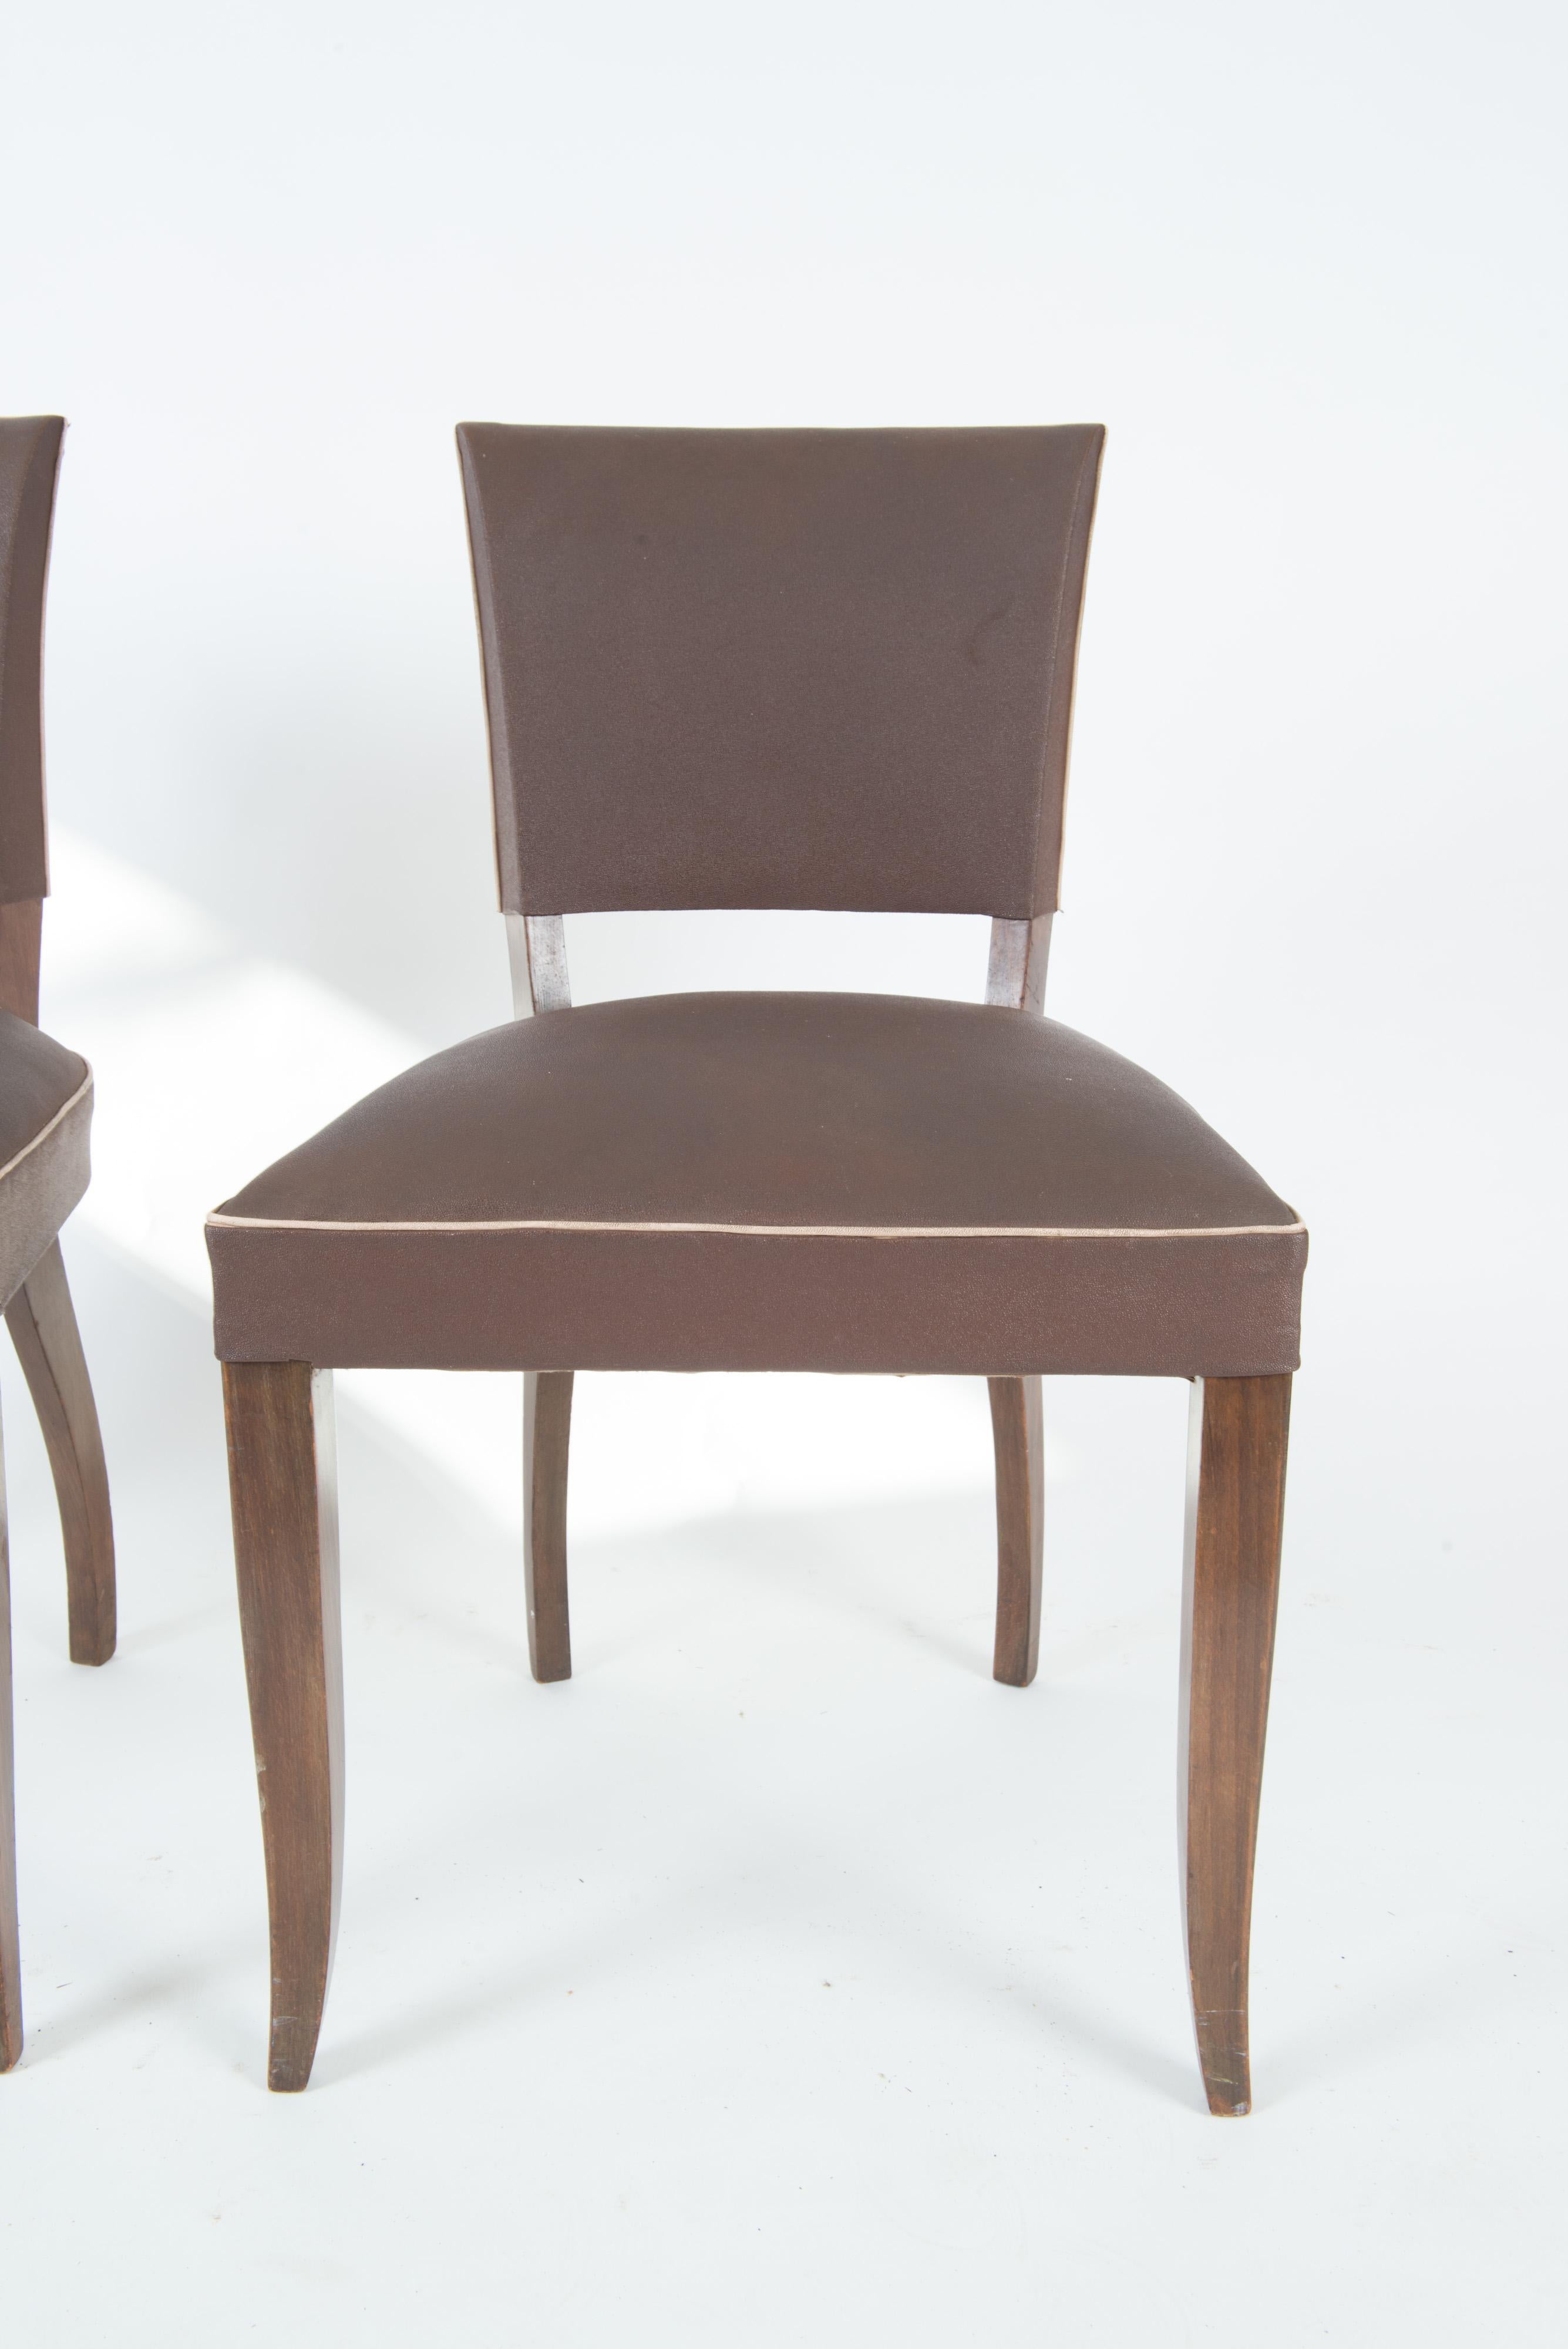 Set of 4 French 1950s Dining Chairs, Brown In Good Condition For Sale In Stamford, CT